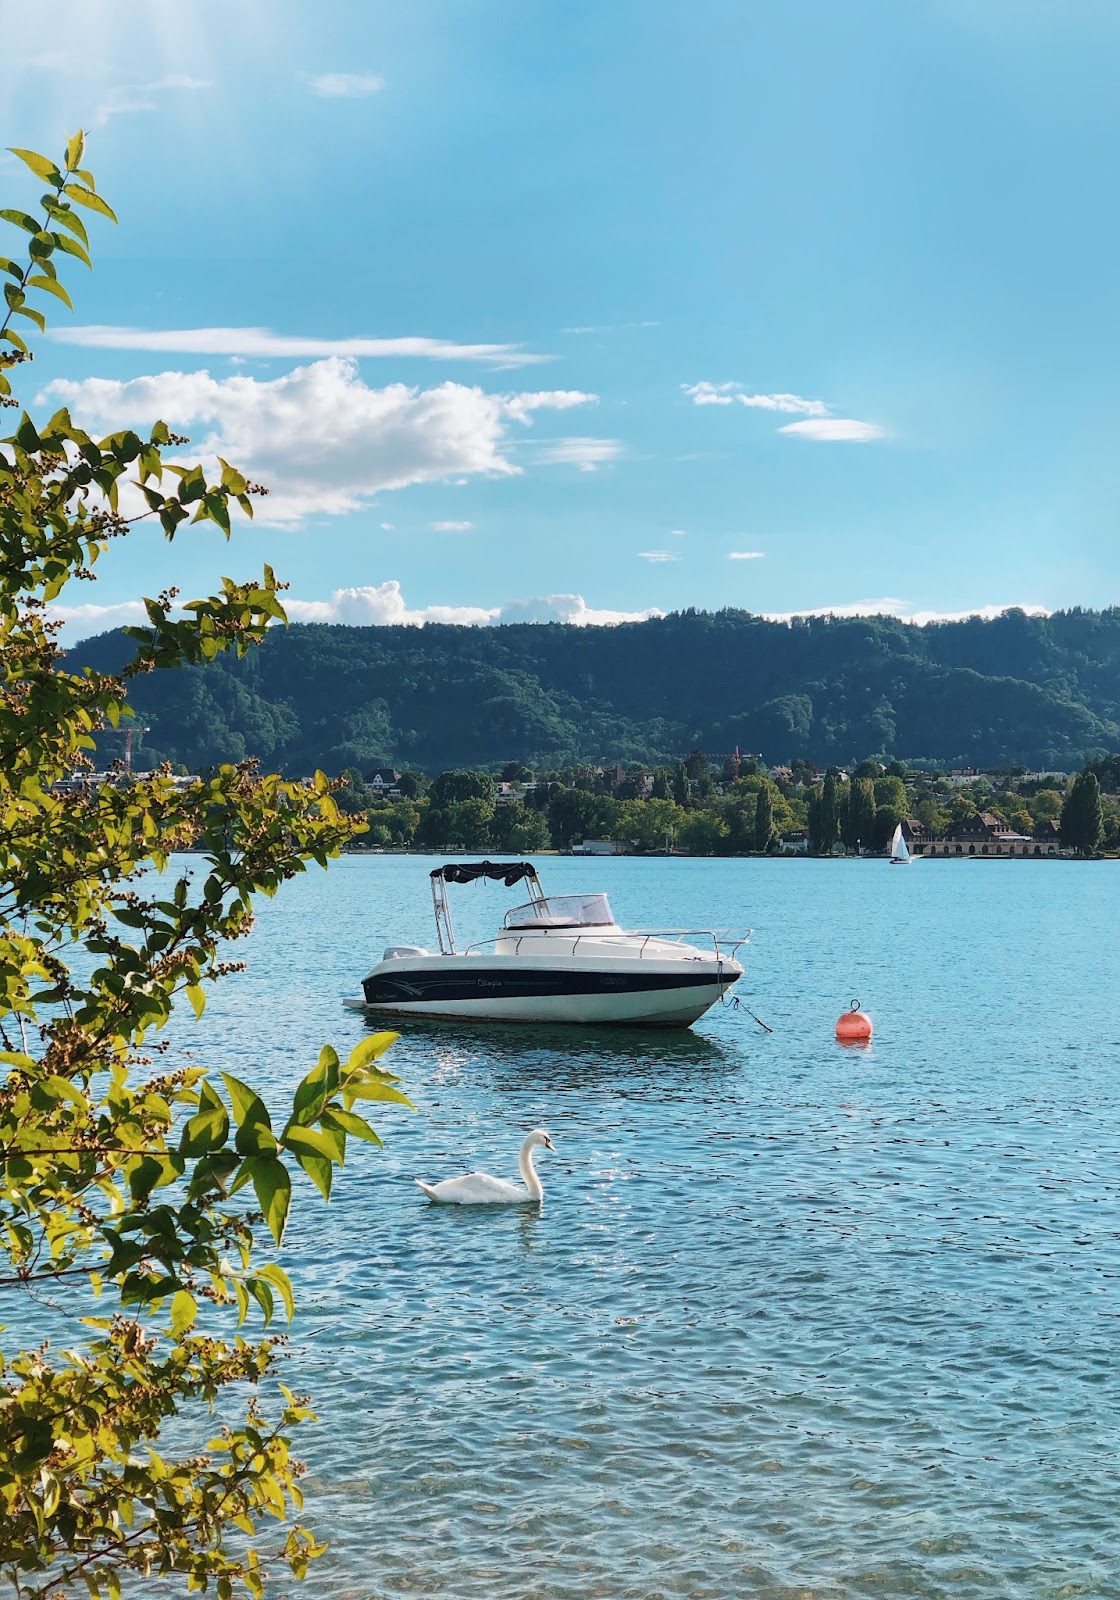 Tranquil waters of Lake Zurich framed by the majestic Swiss Alps